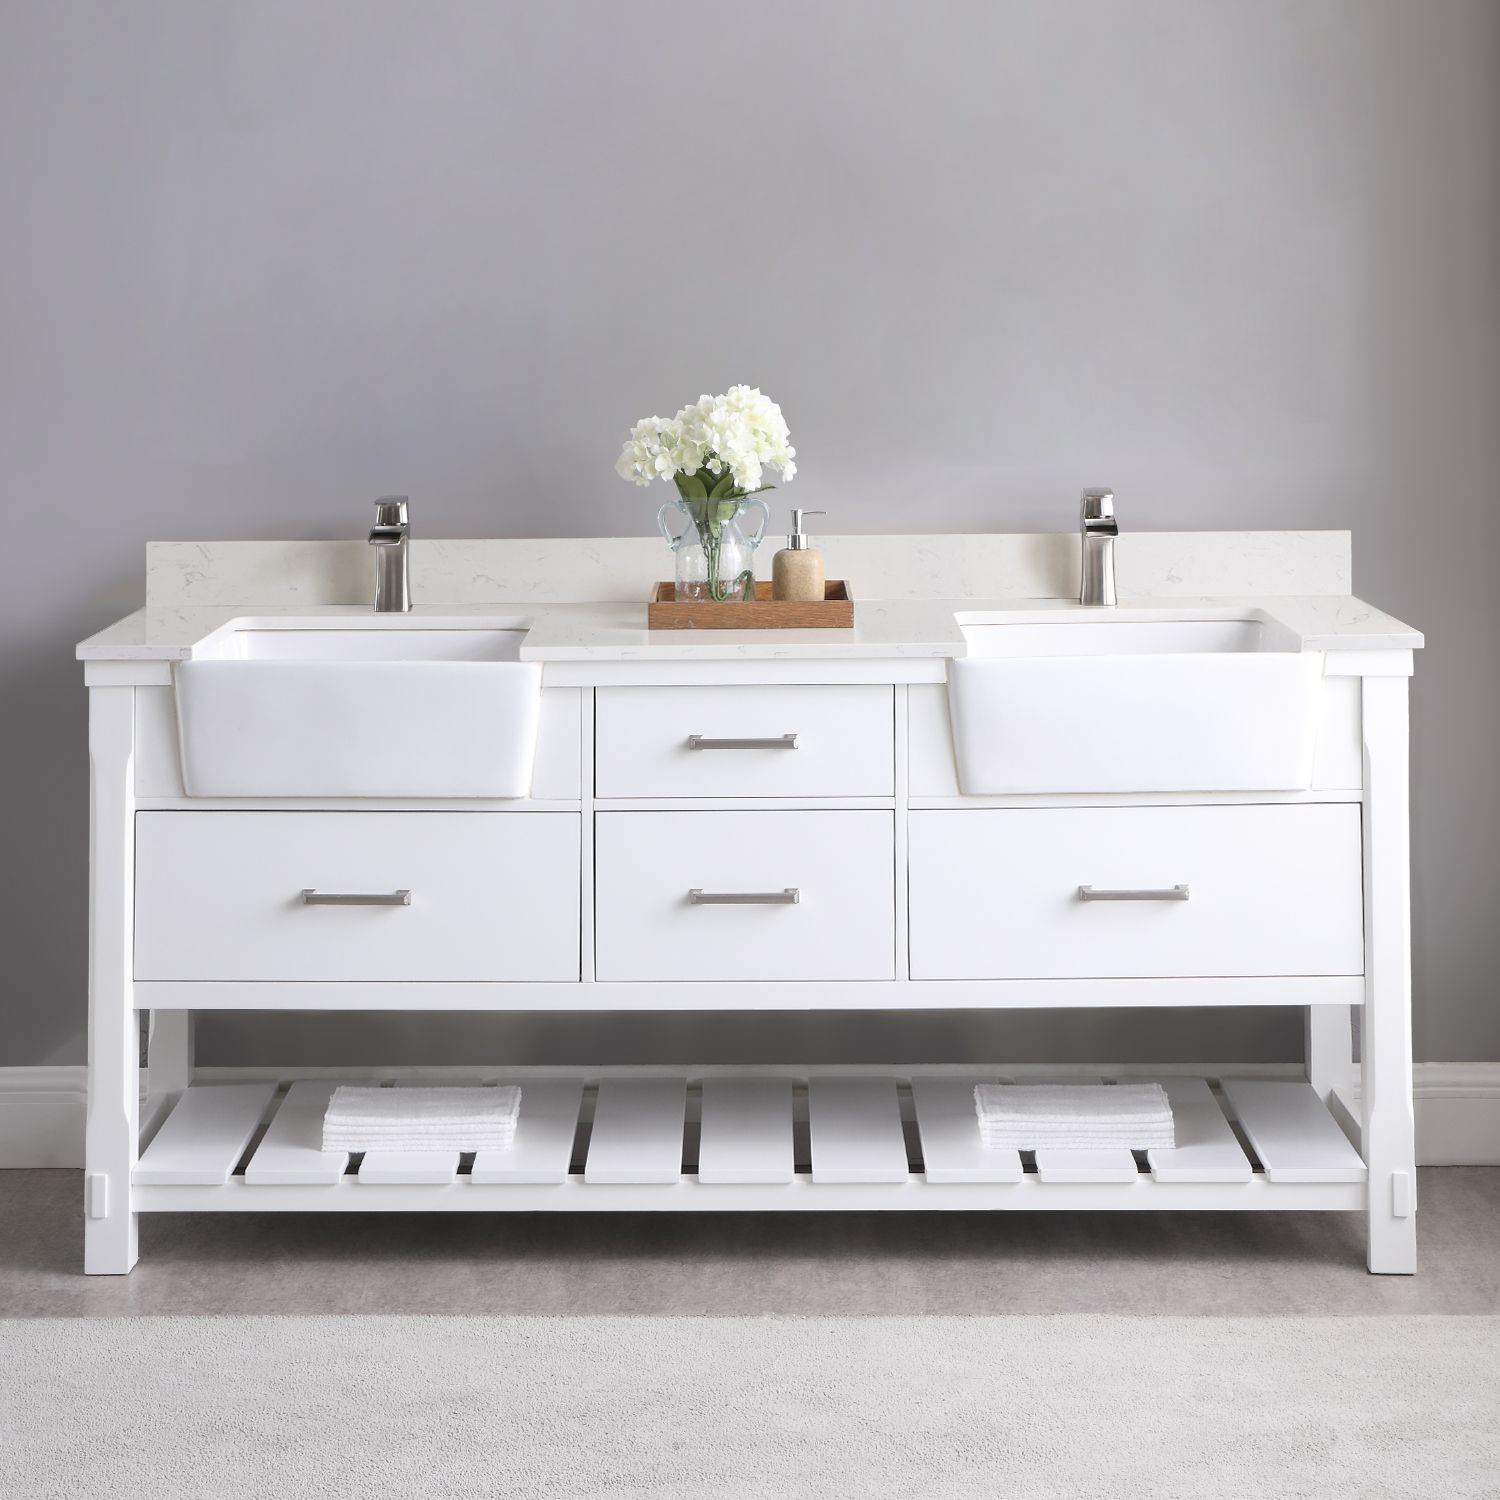 Issac Edwards Collection 72" Double Bathroom Vanity Set in White and Composite Carrara White Stone Top with White Farmhouse Basin without Mirror